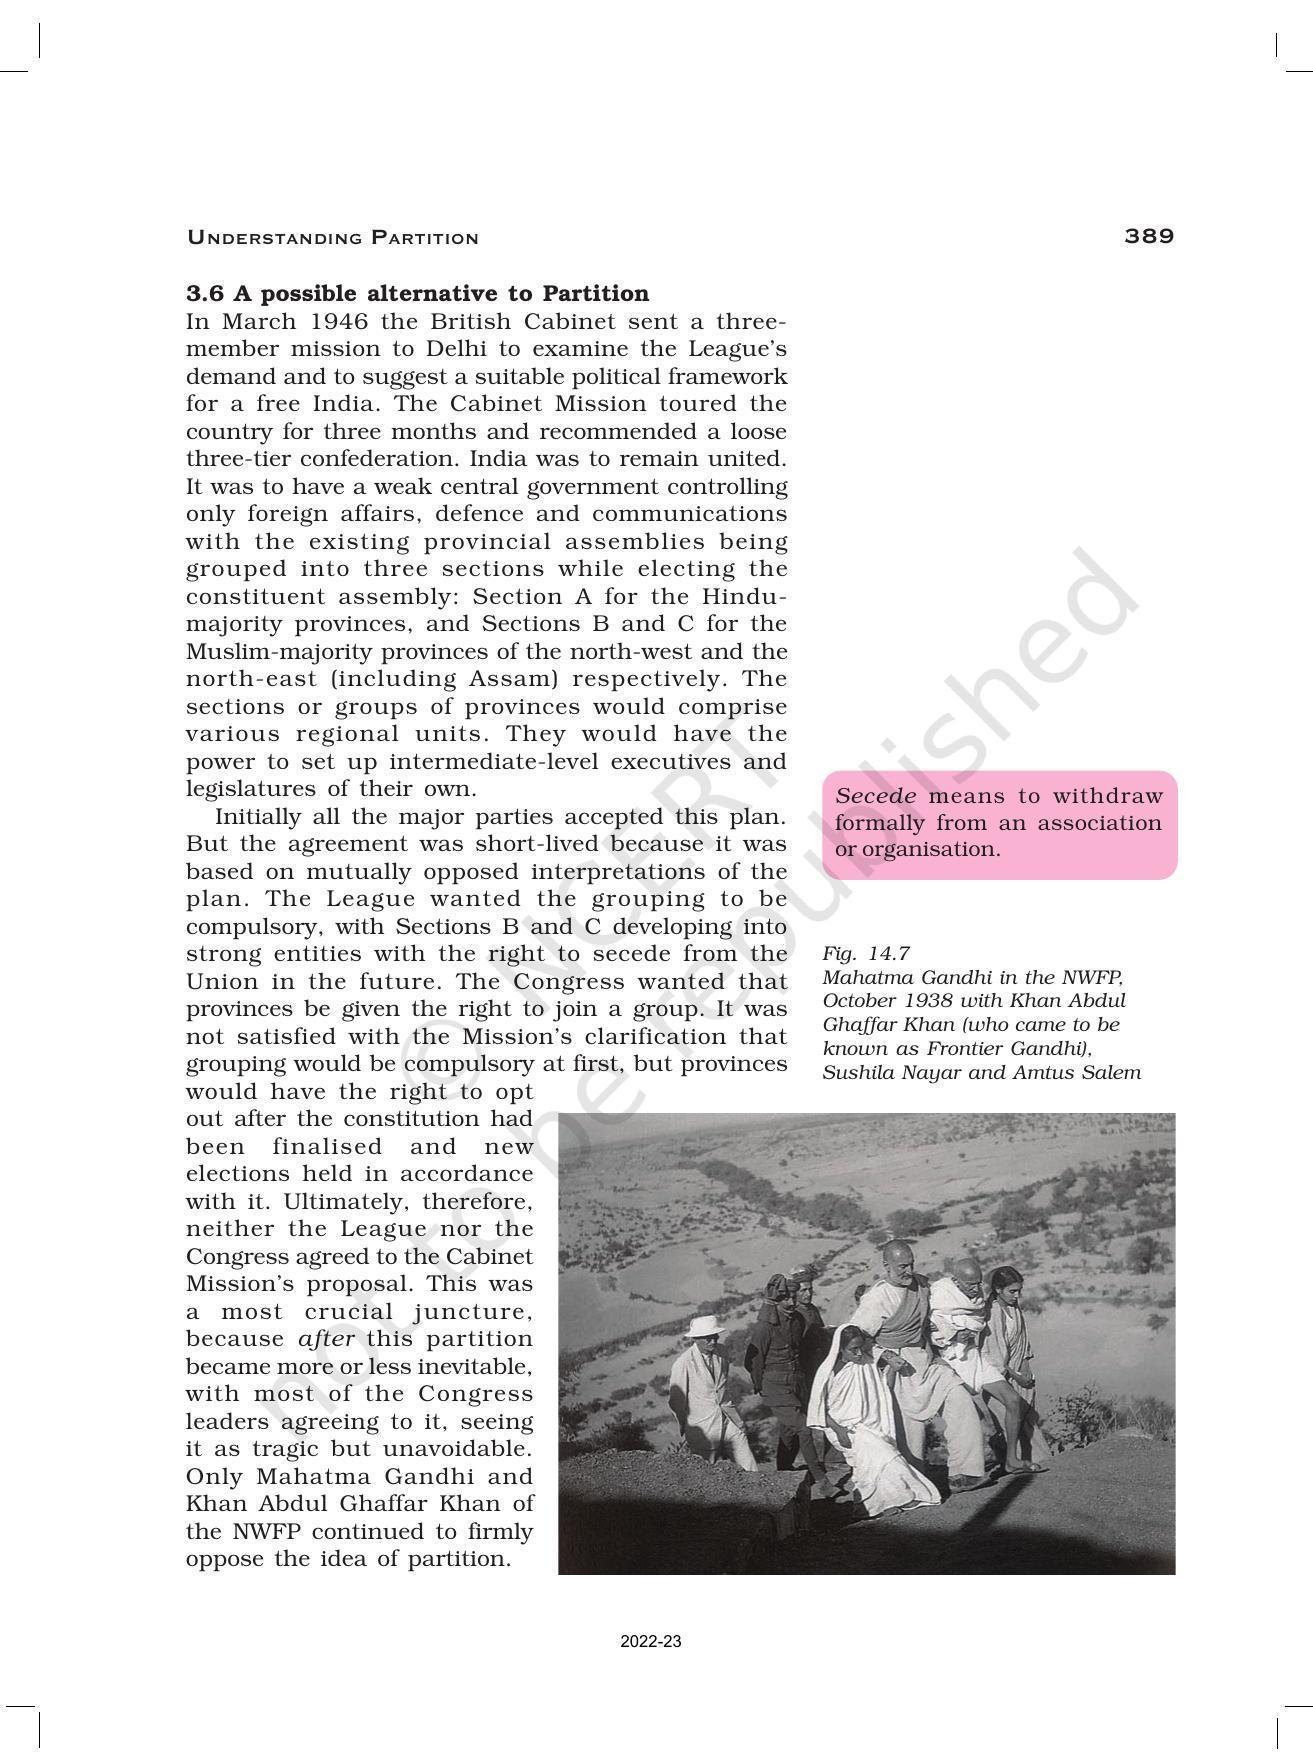 NCERT Book for Class 12 History (Part-III) Chapter 14 Understanding Partition - Page 14